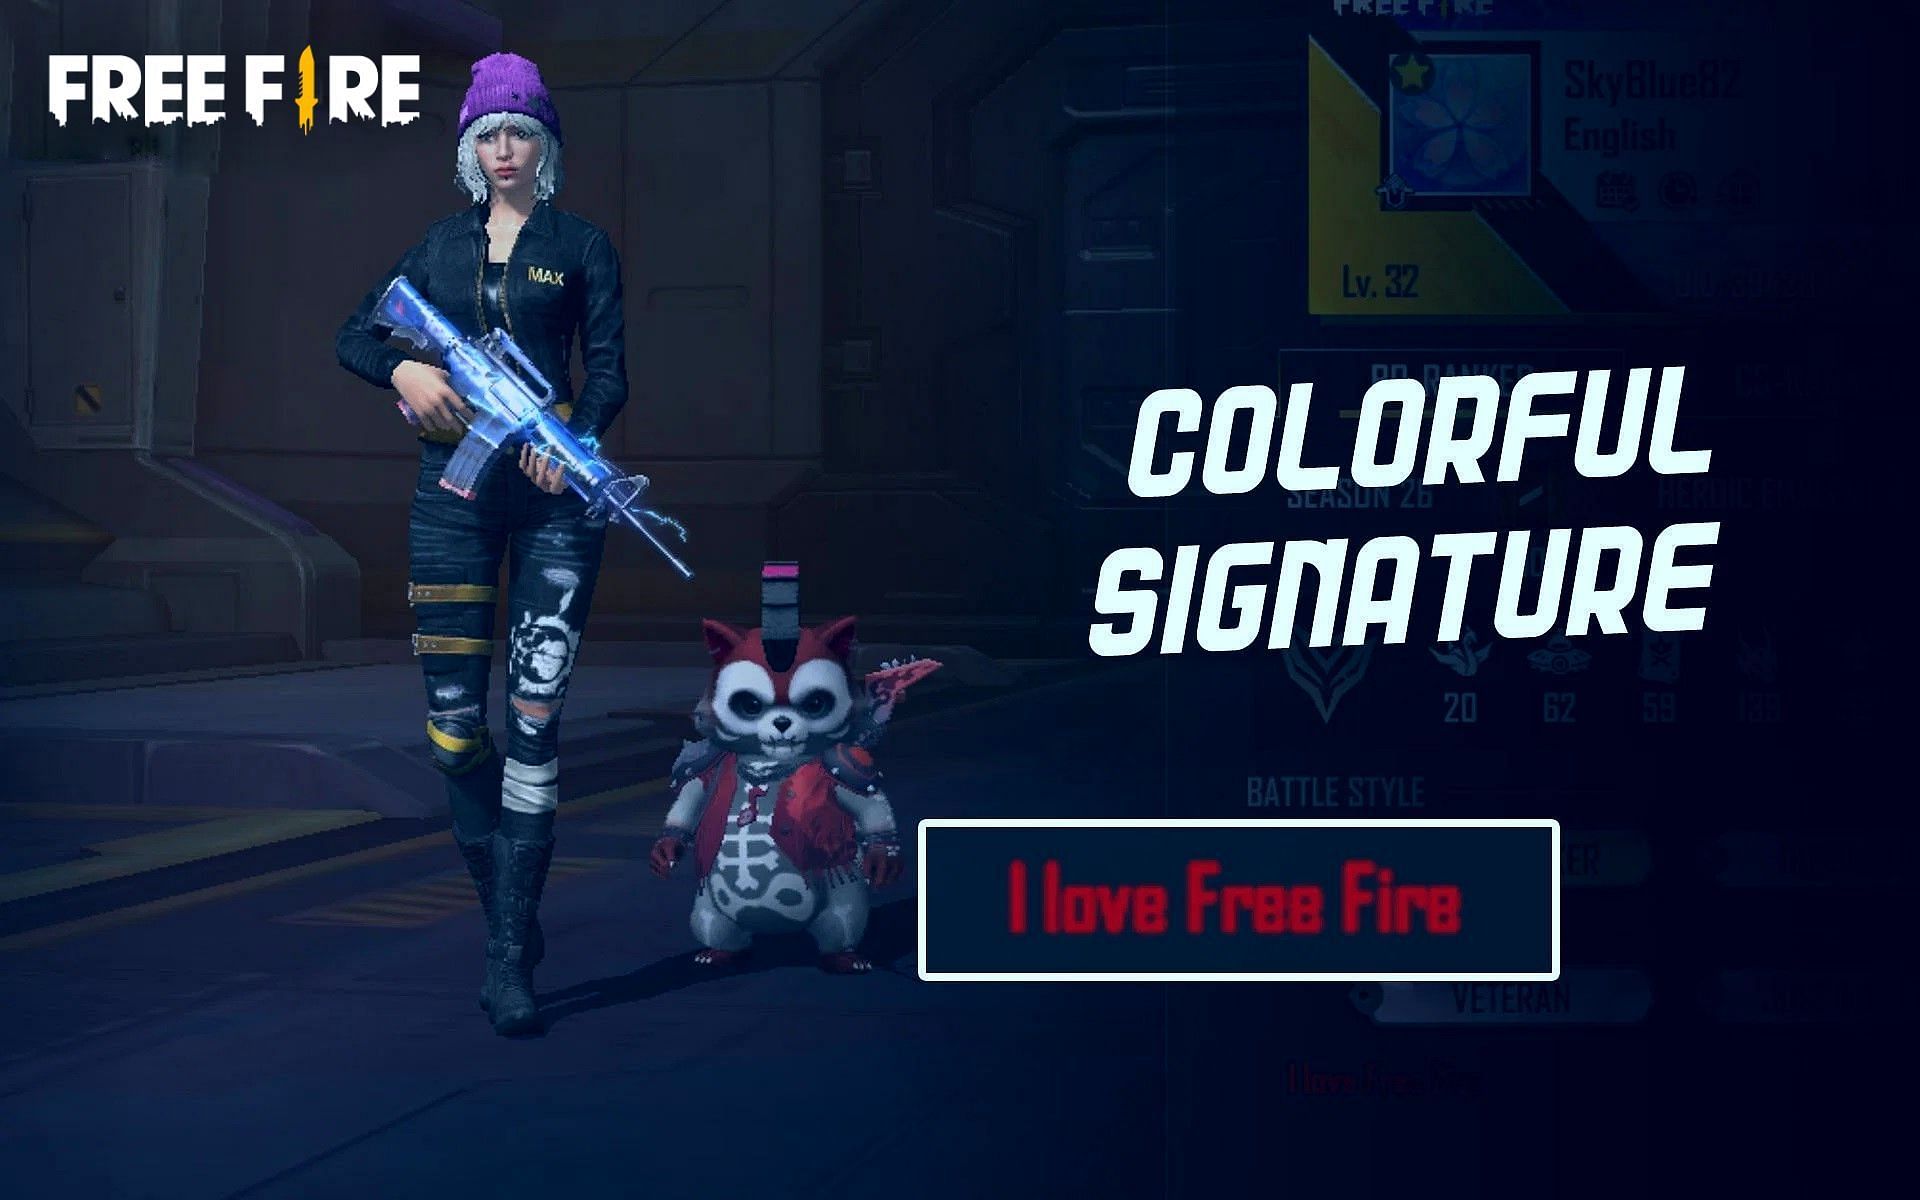 Details on how users can have colorful signatures within the game (Image via Sportskeeda)